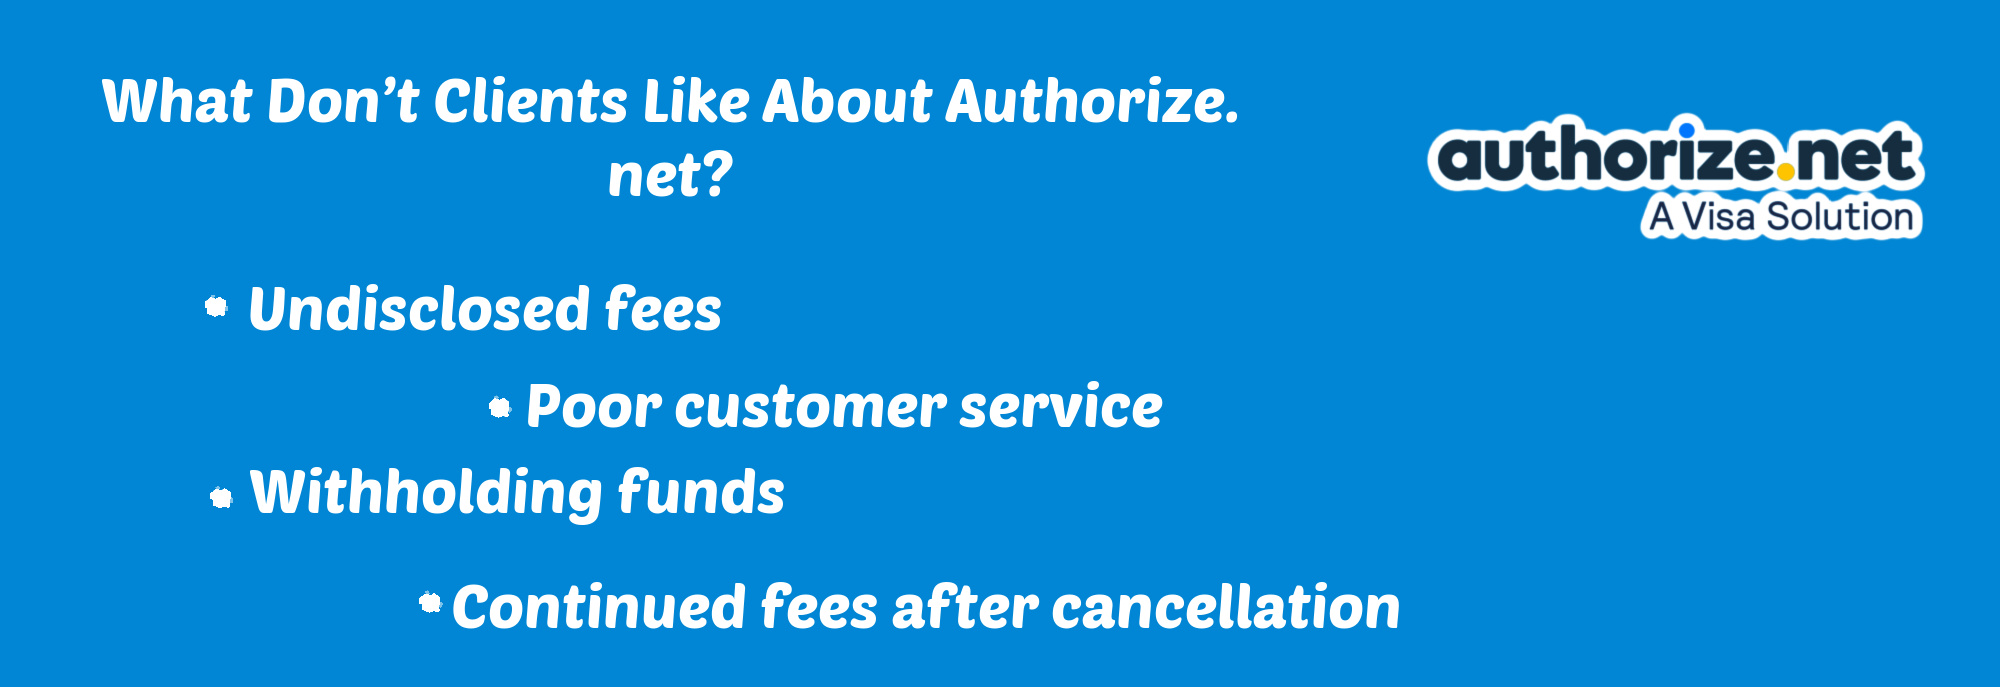 image of what dont clients like about authorize.net